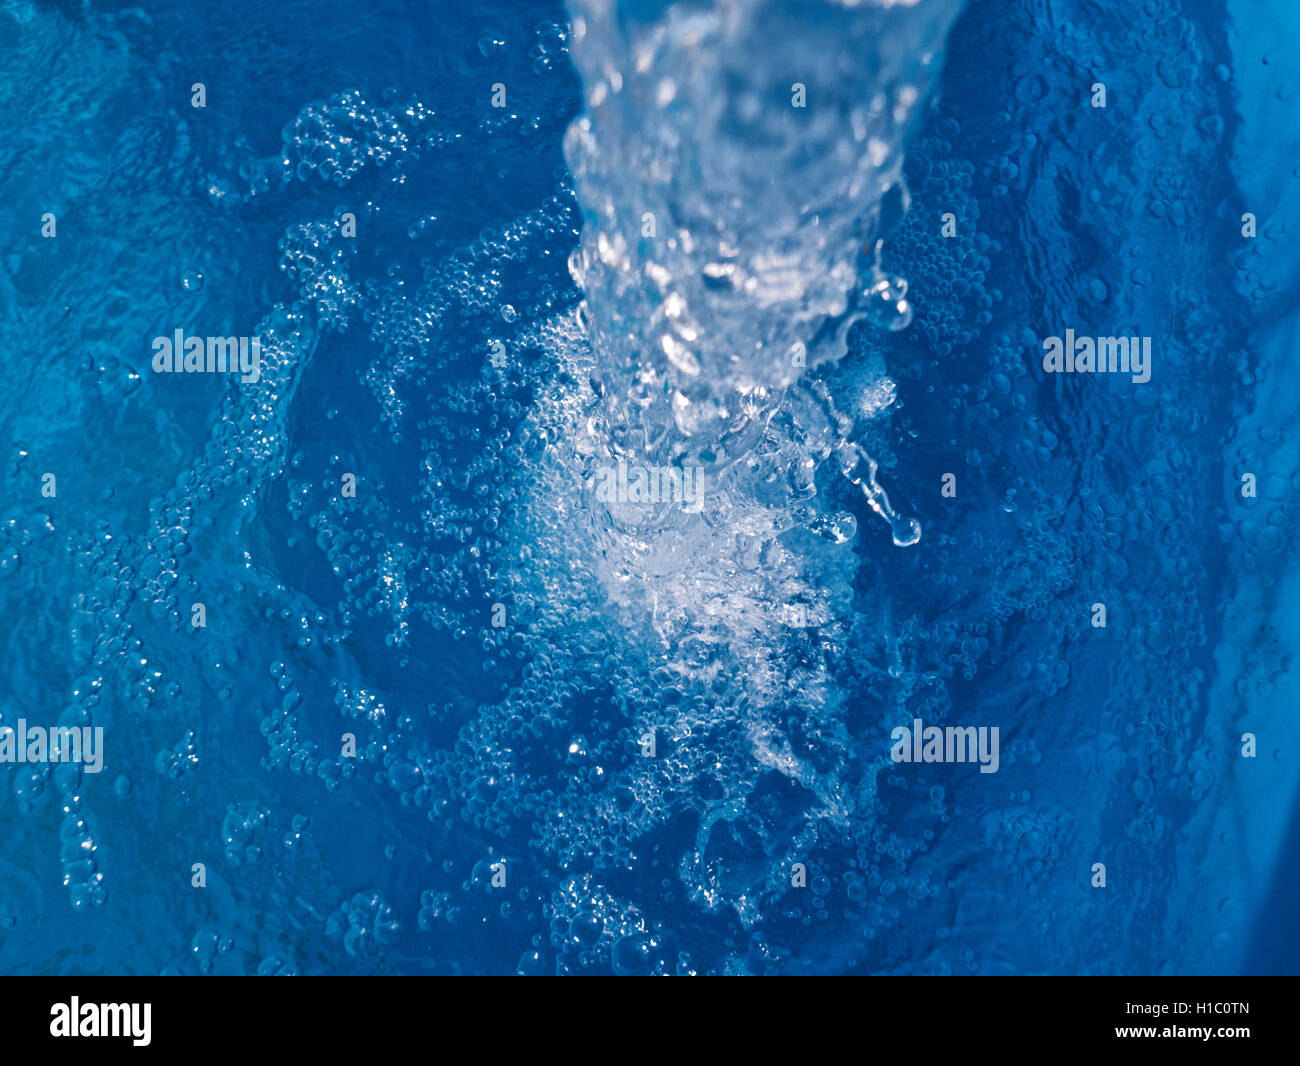 Water flowing, oxygenating air bubbles. Stock Photo